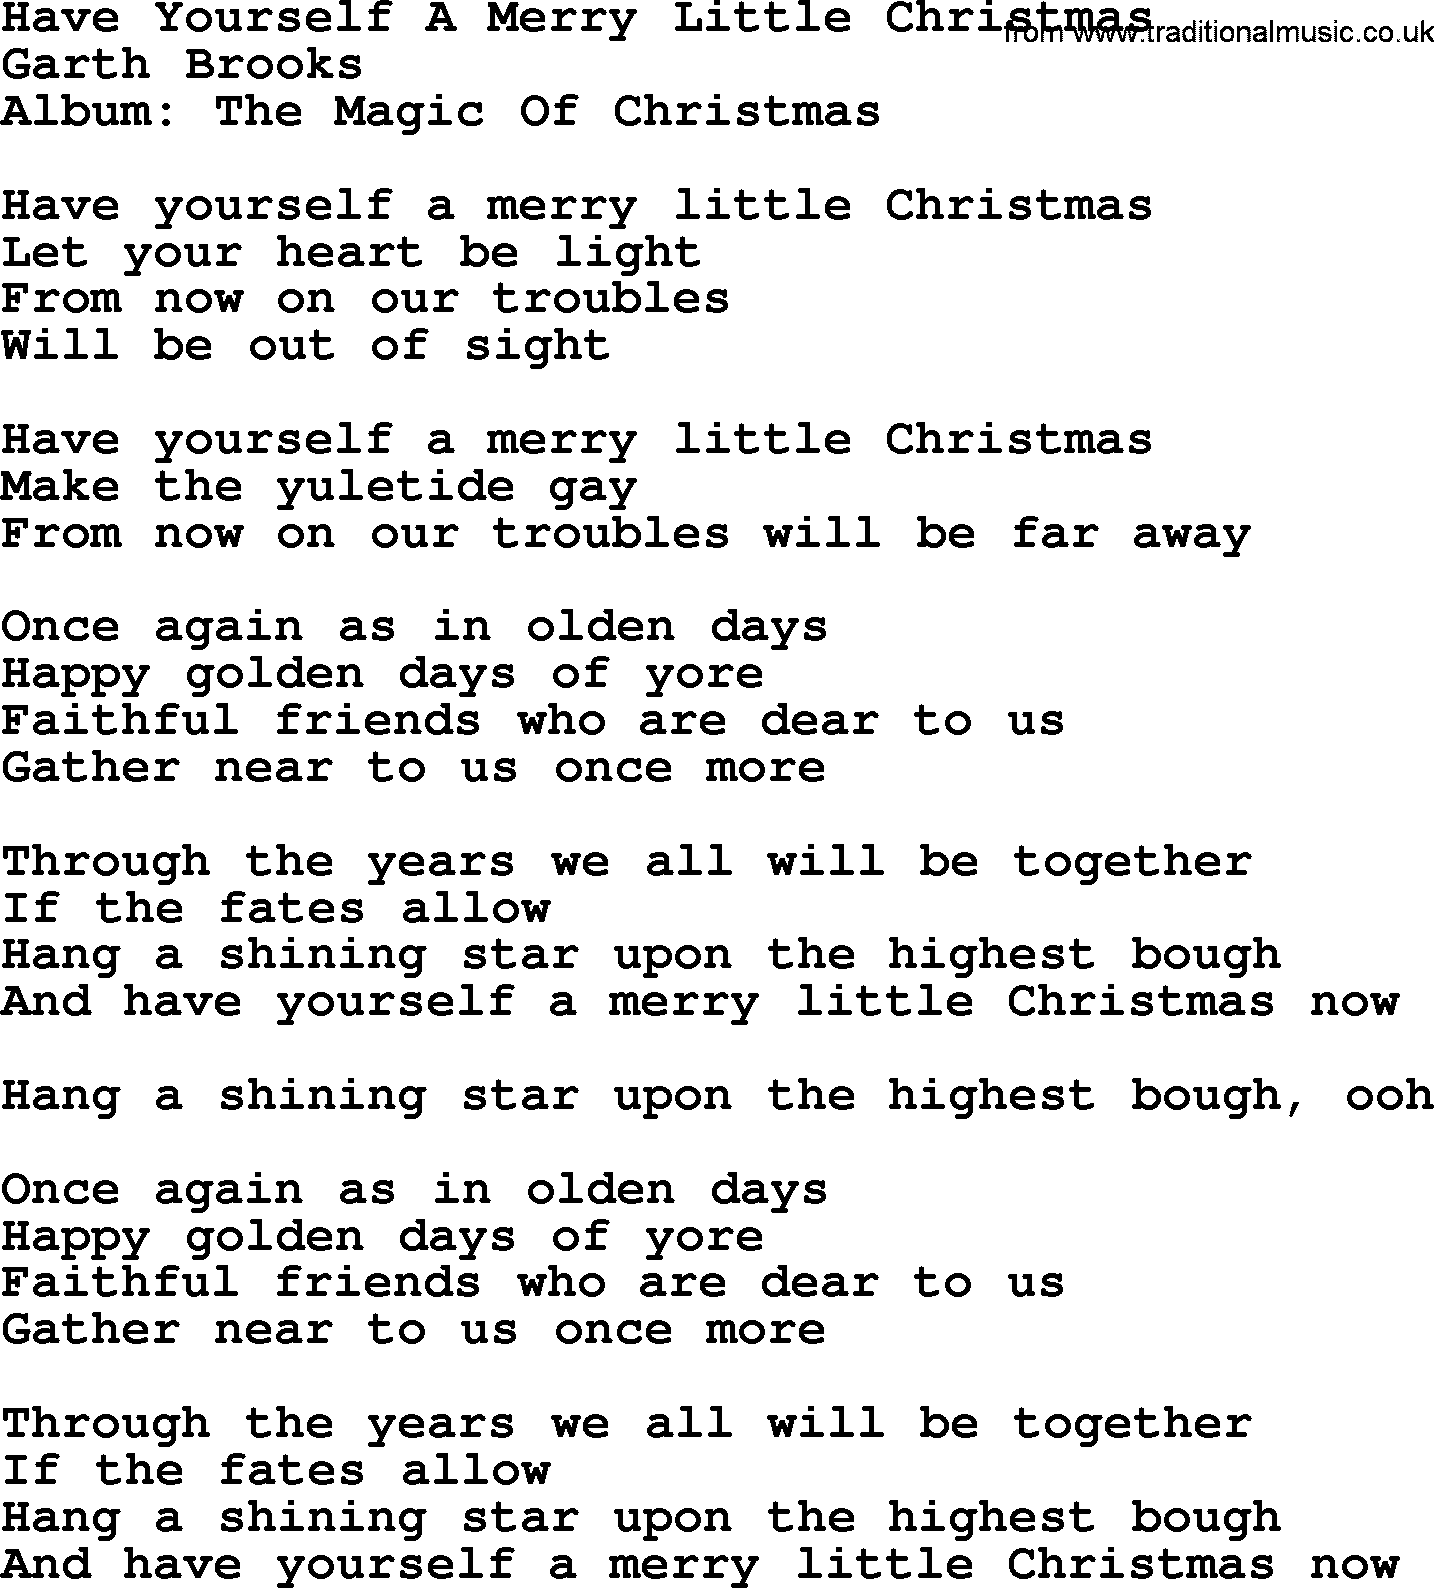 Garth Brooks song: Have Yourself A Merry Little Christmas, lyrics